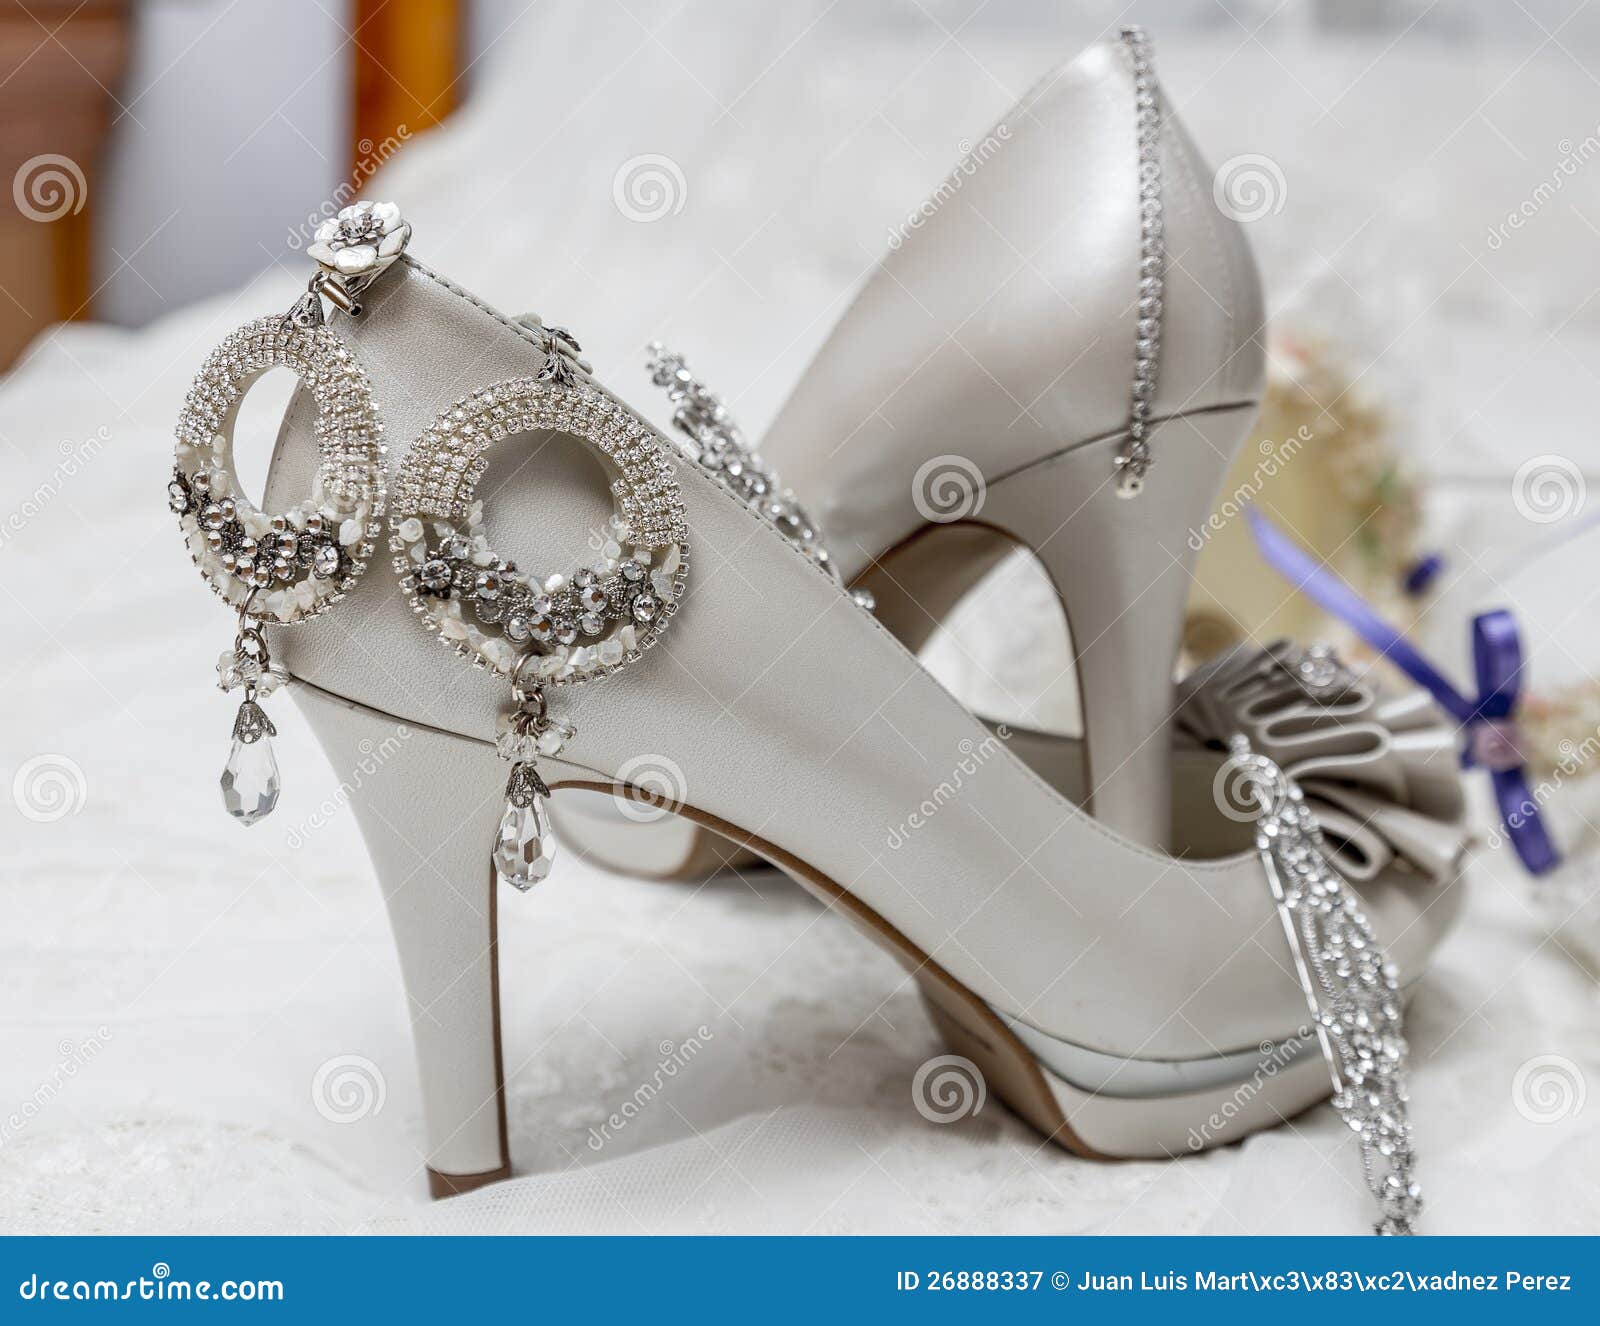 Bridal accessories stock image. Image of fashion, earrings - 26888337